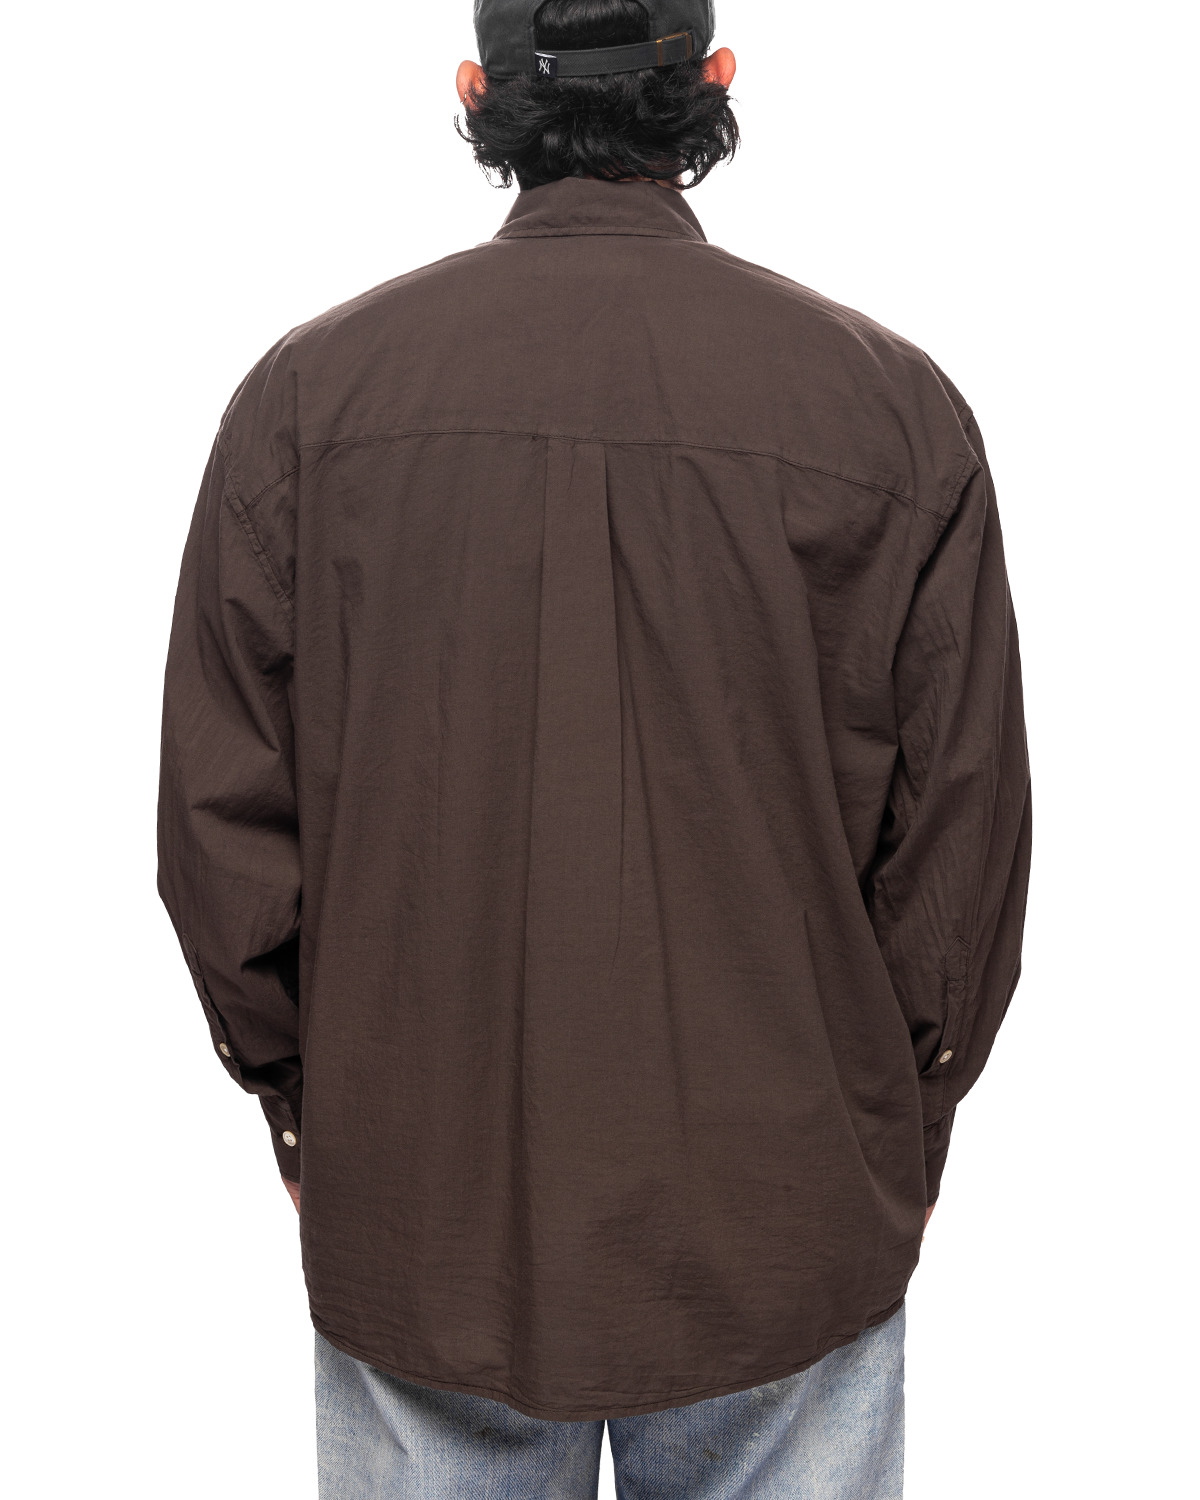 Borrowed BD Shirt Faded Brown Cotton Voile - 3